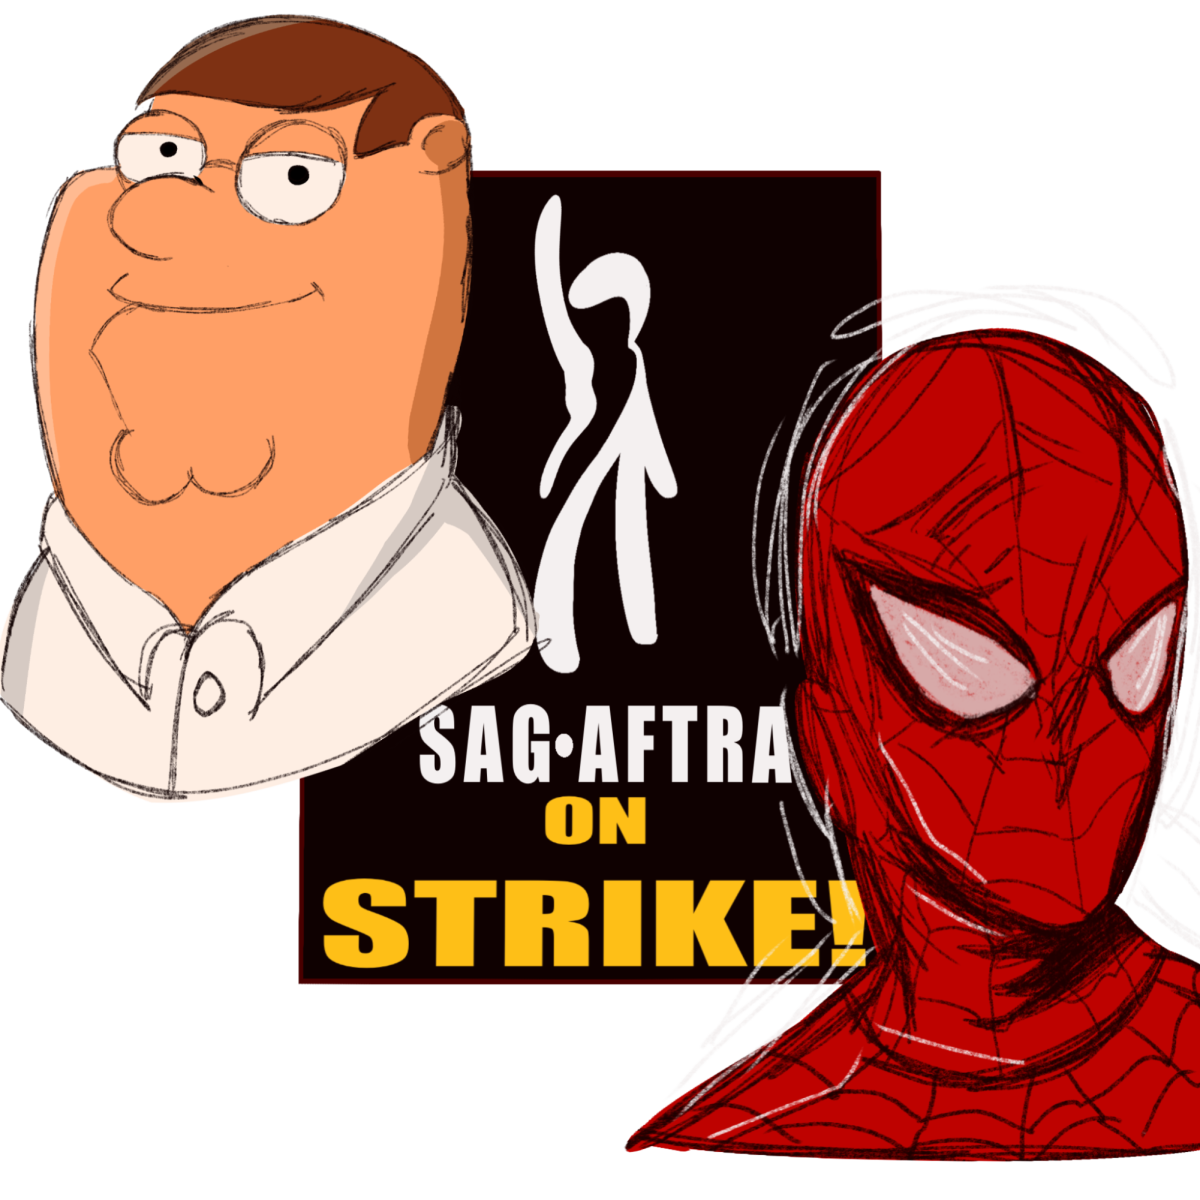 “Spider-Man: Beyond the Spider-Verse,” and “Family Guy” were two shows that were restricted by the SAG-AFTRA strike.